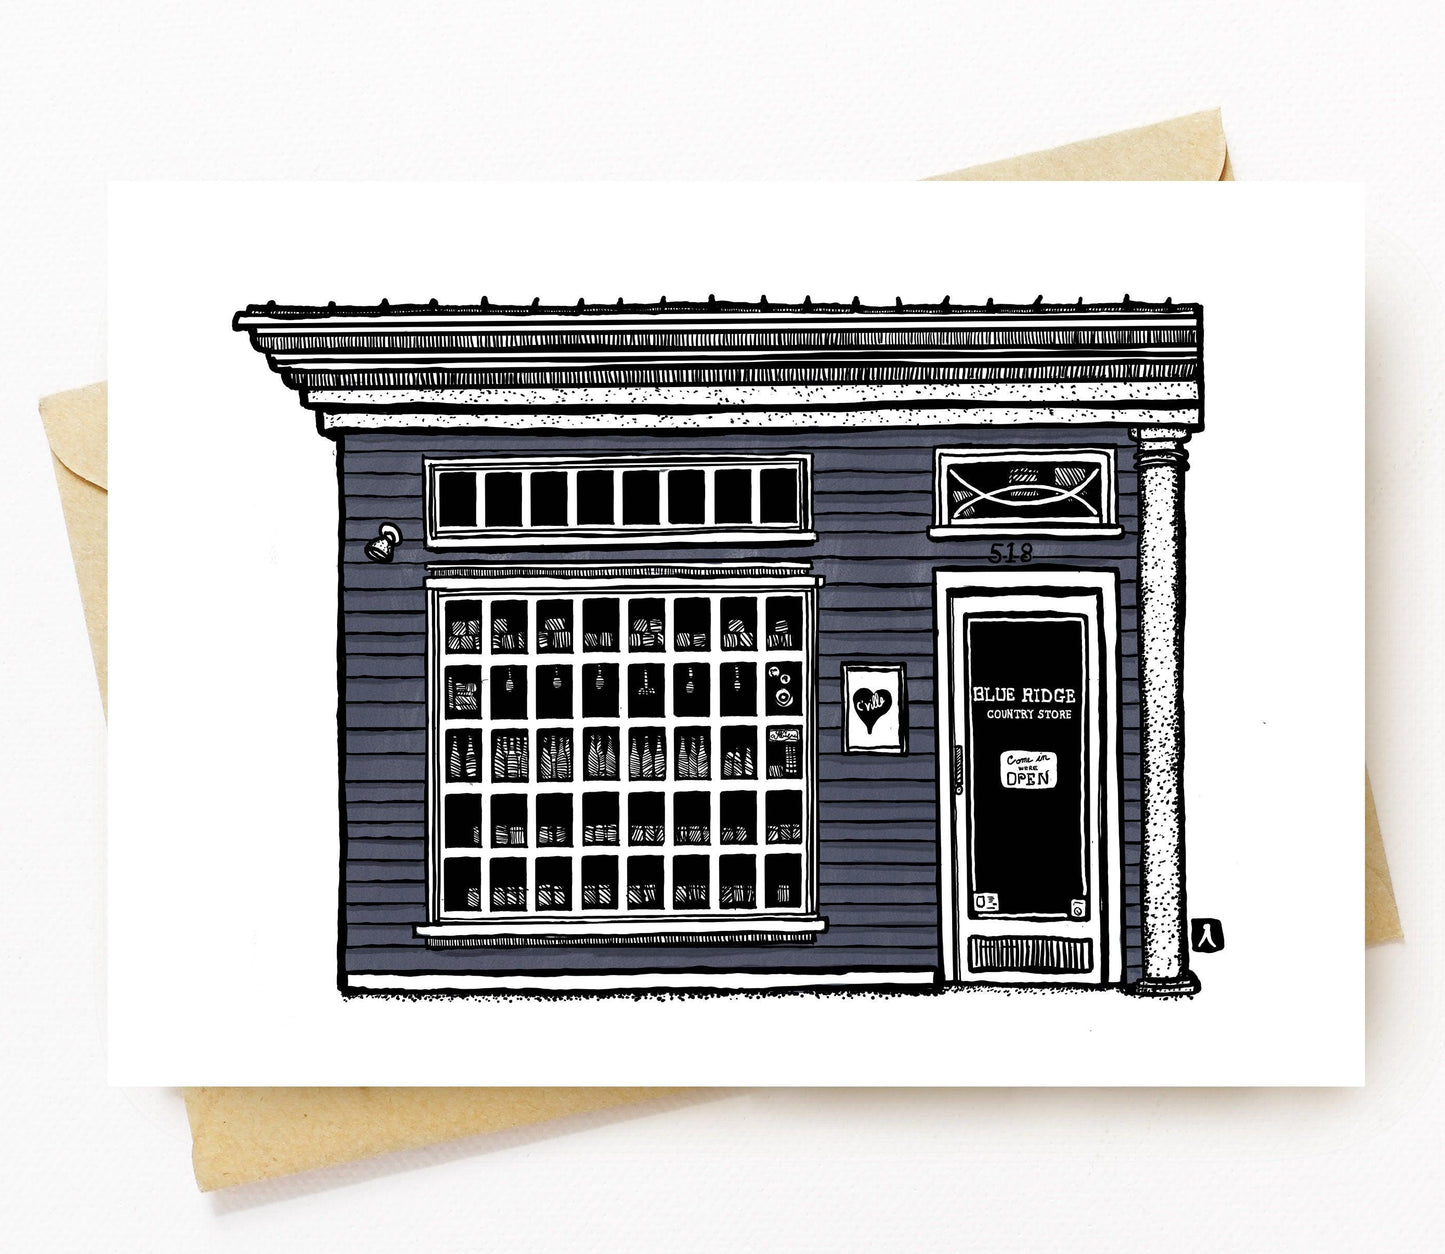 BellavanceInk: Greeting Card With A Pen & Ink Drawing Of Blue Ridge Country Store In Charlottesville 5 x 7 Inches - BellavanceInk